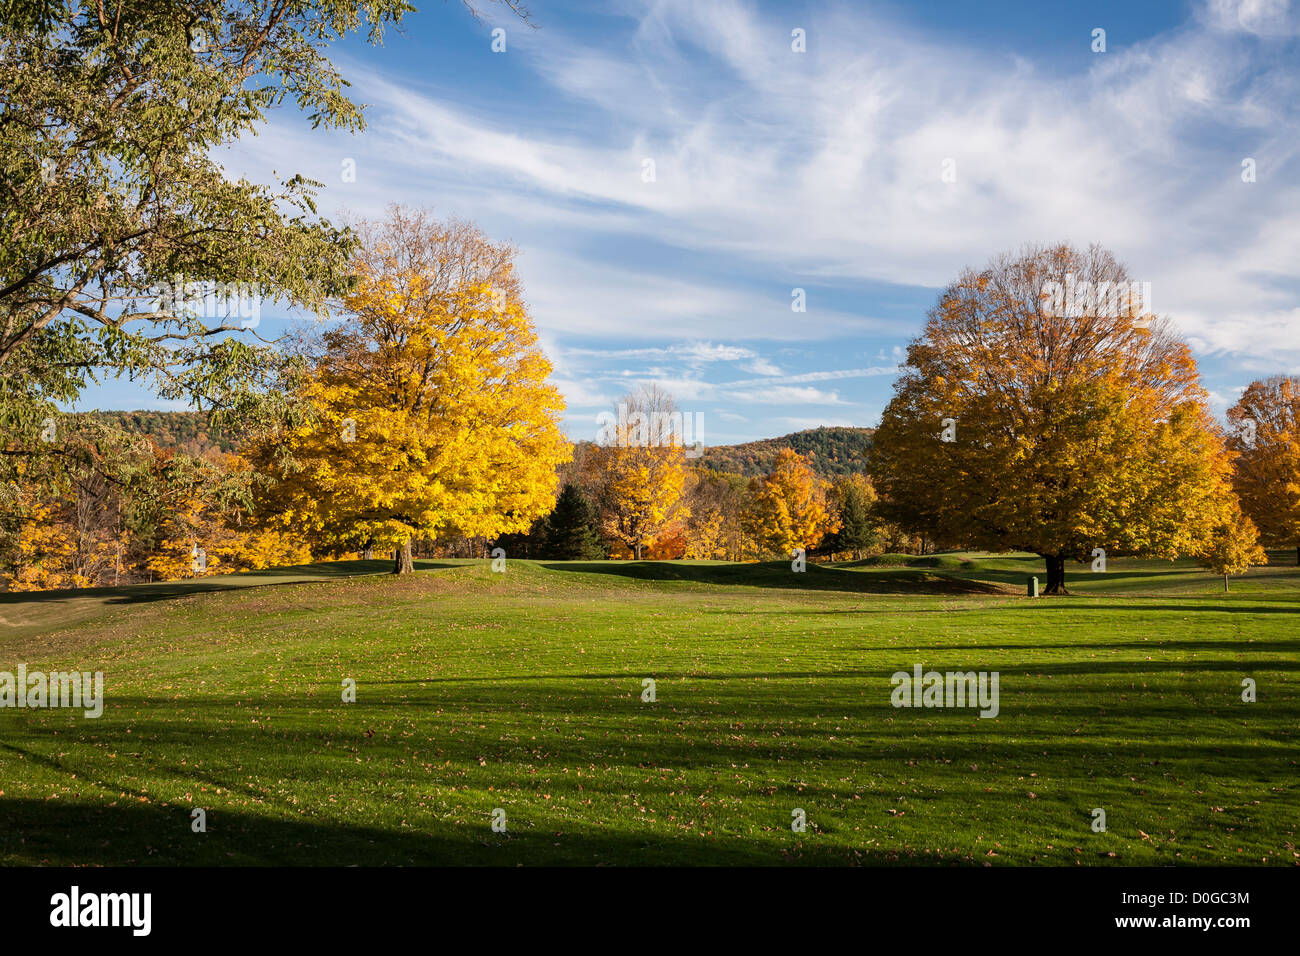 Leatherstocking Golf Course, Autumn, Cooperstown, NY Stock Photo